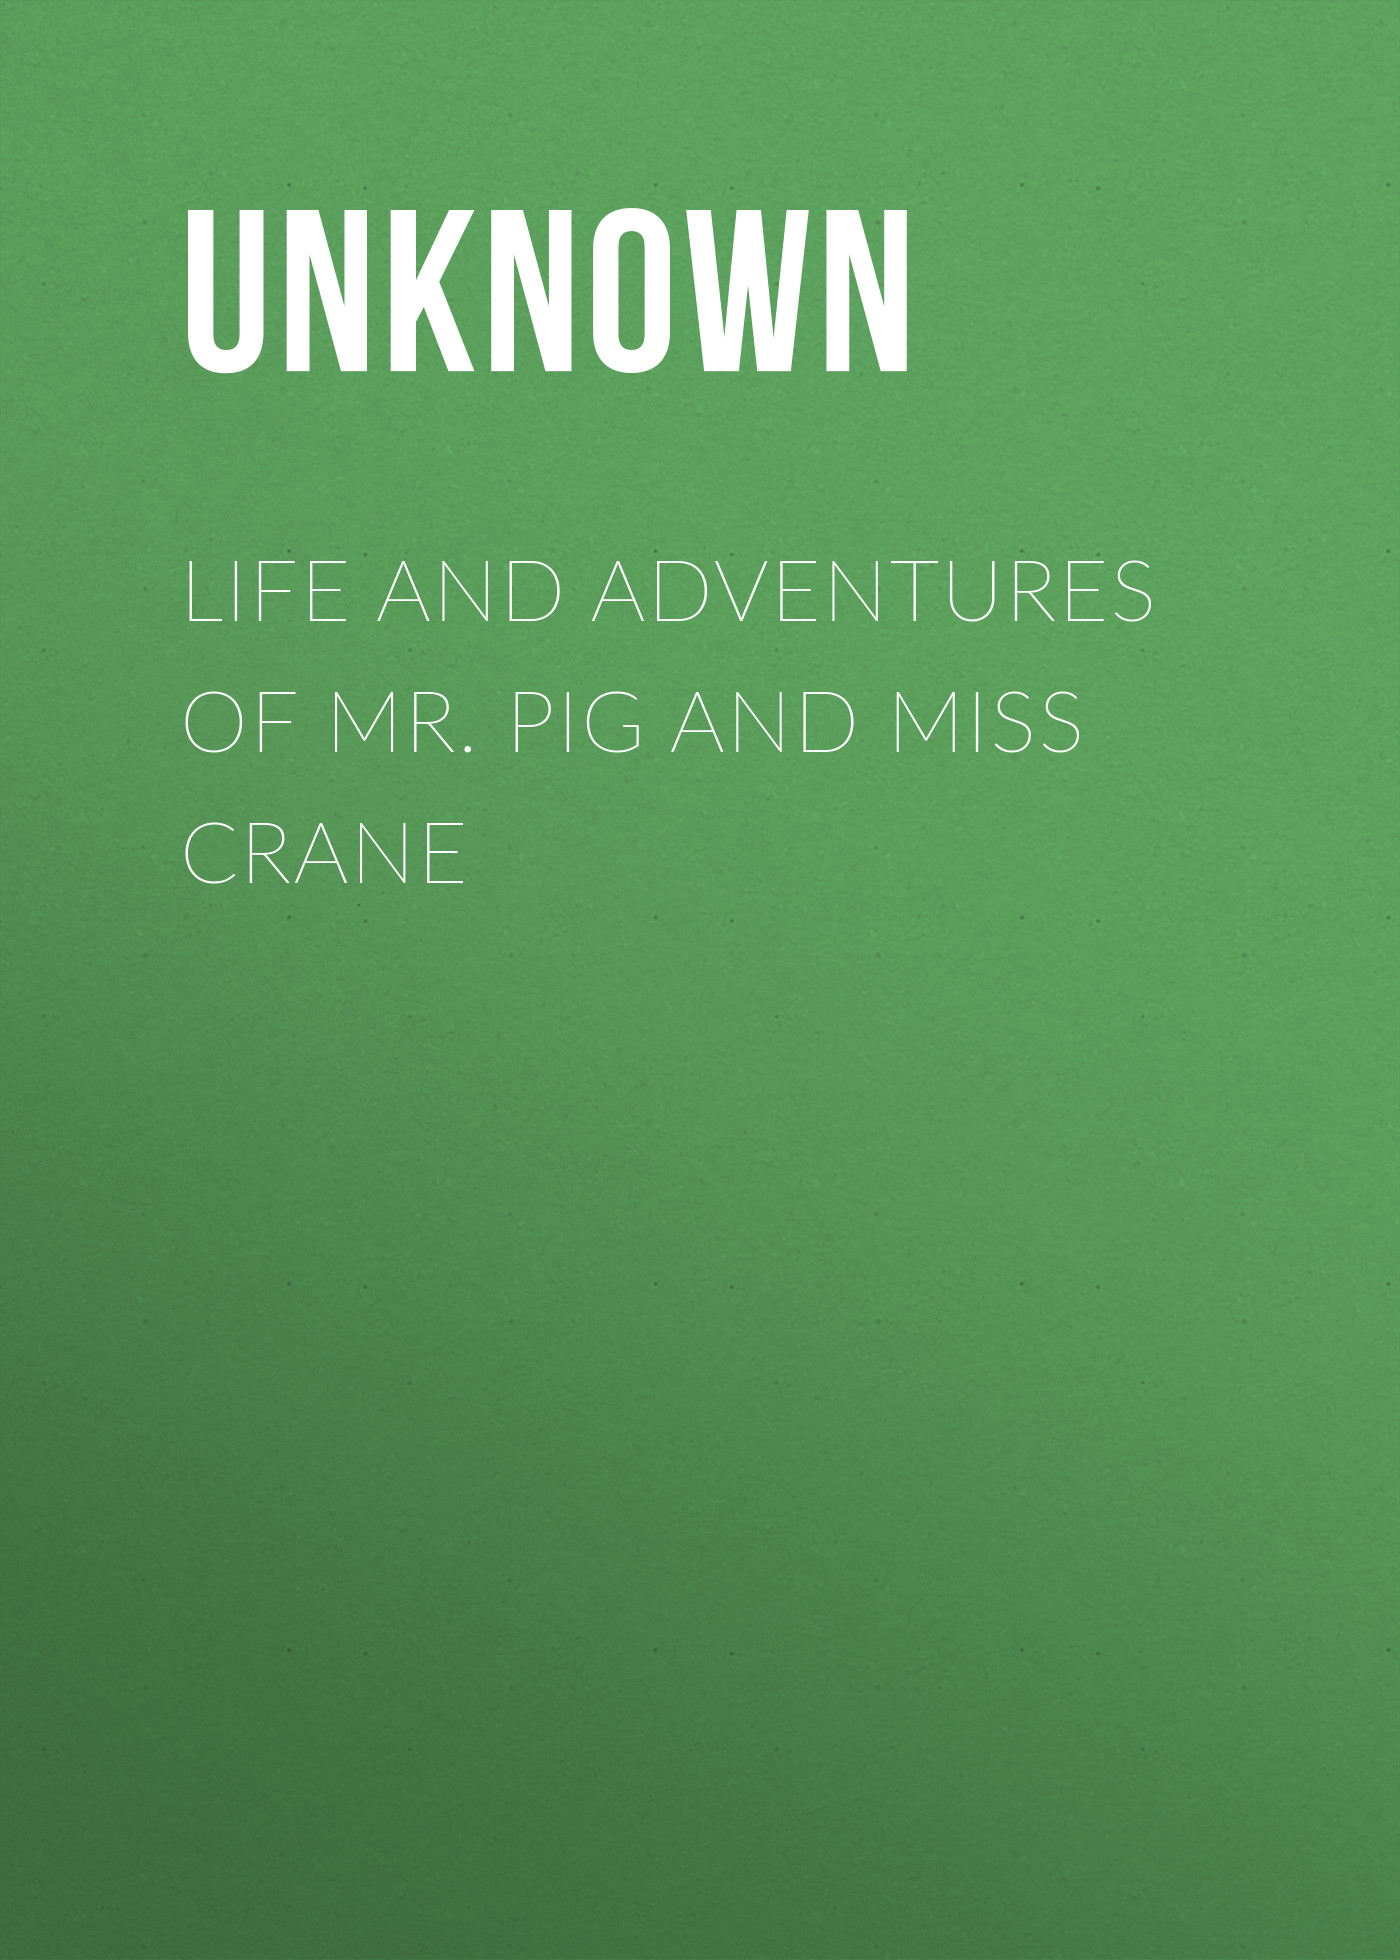 Unknown Life and Adventures of Mr. Pig and Miss Crane